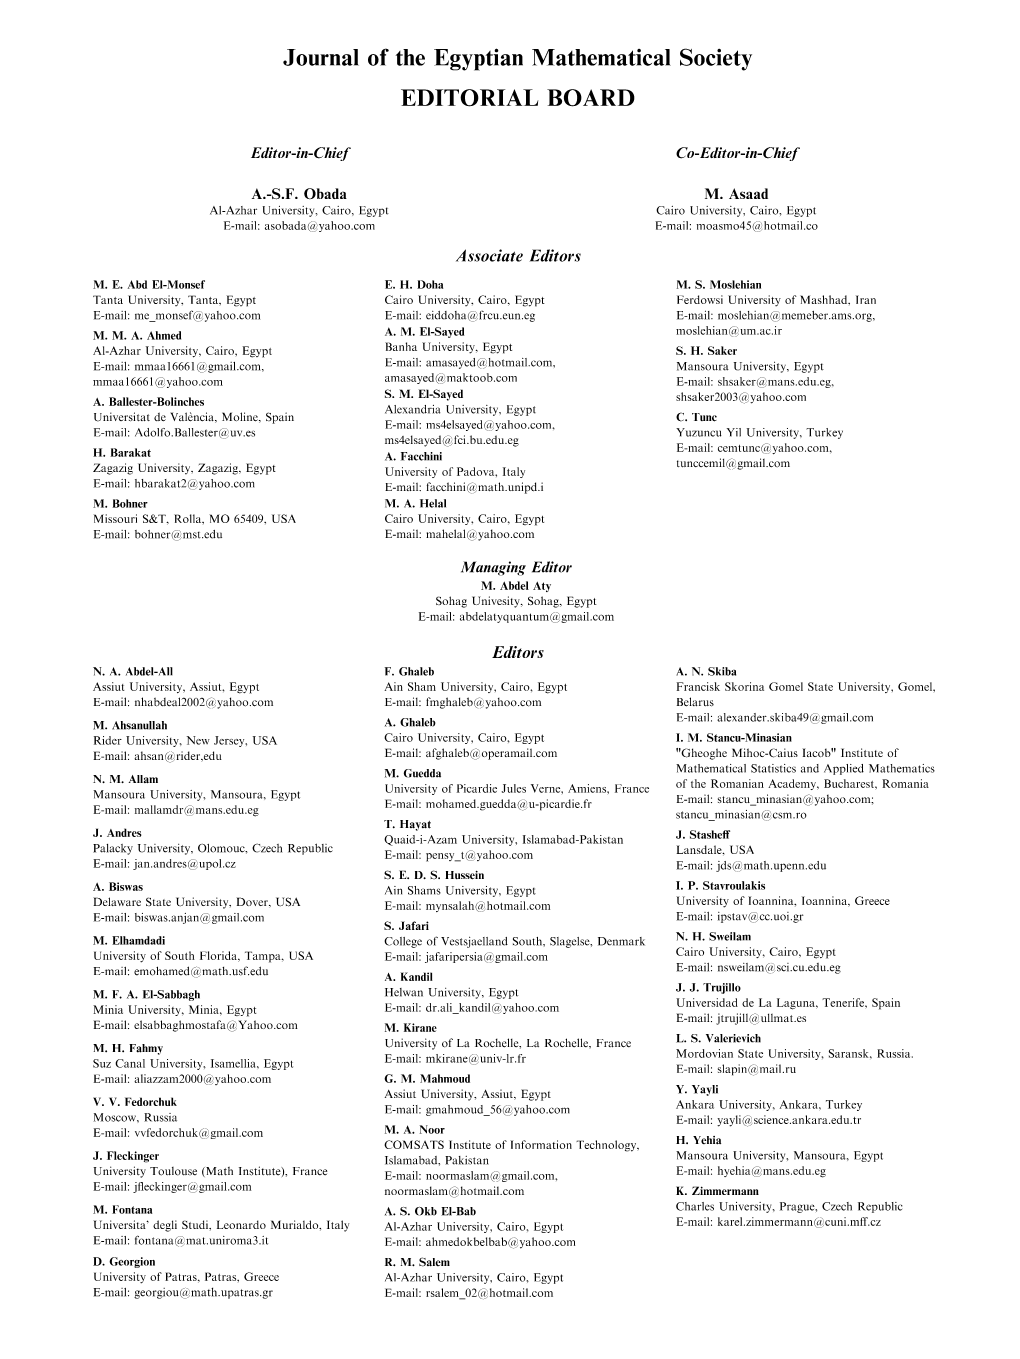 Journal of the Egyptian Mathematical Society EDITORIAL BOARD